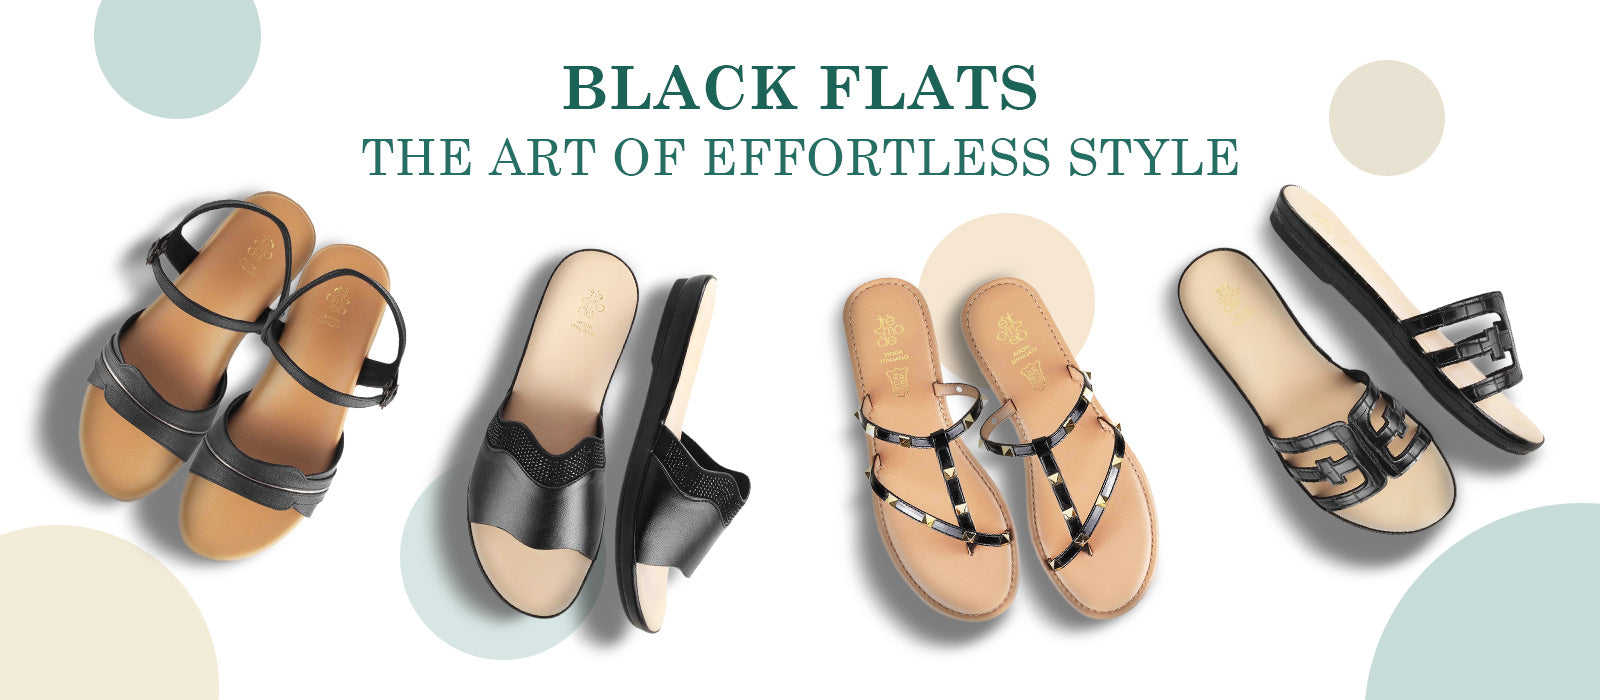 Black Flats: The Art of Effortless Style